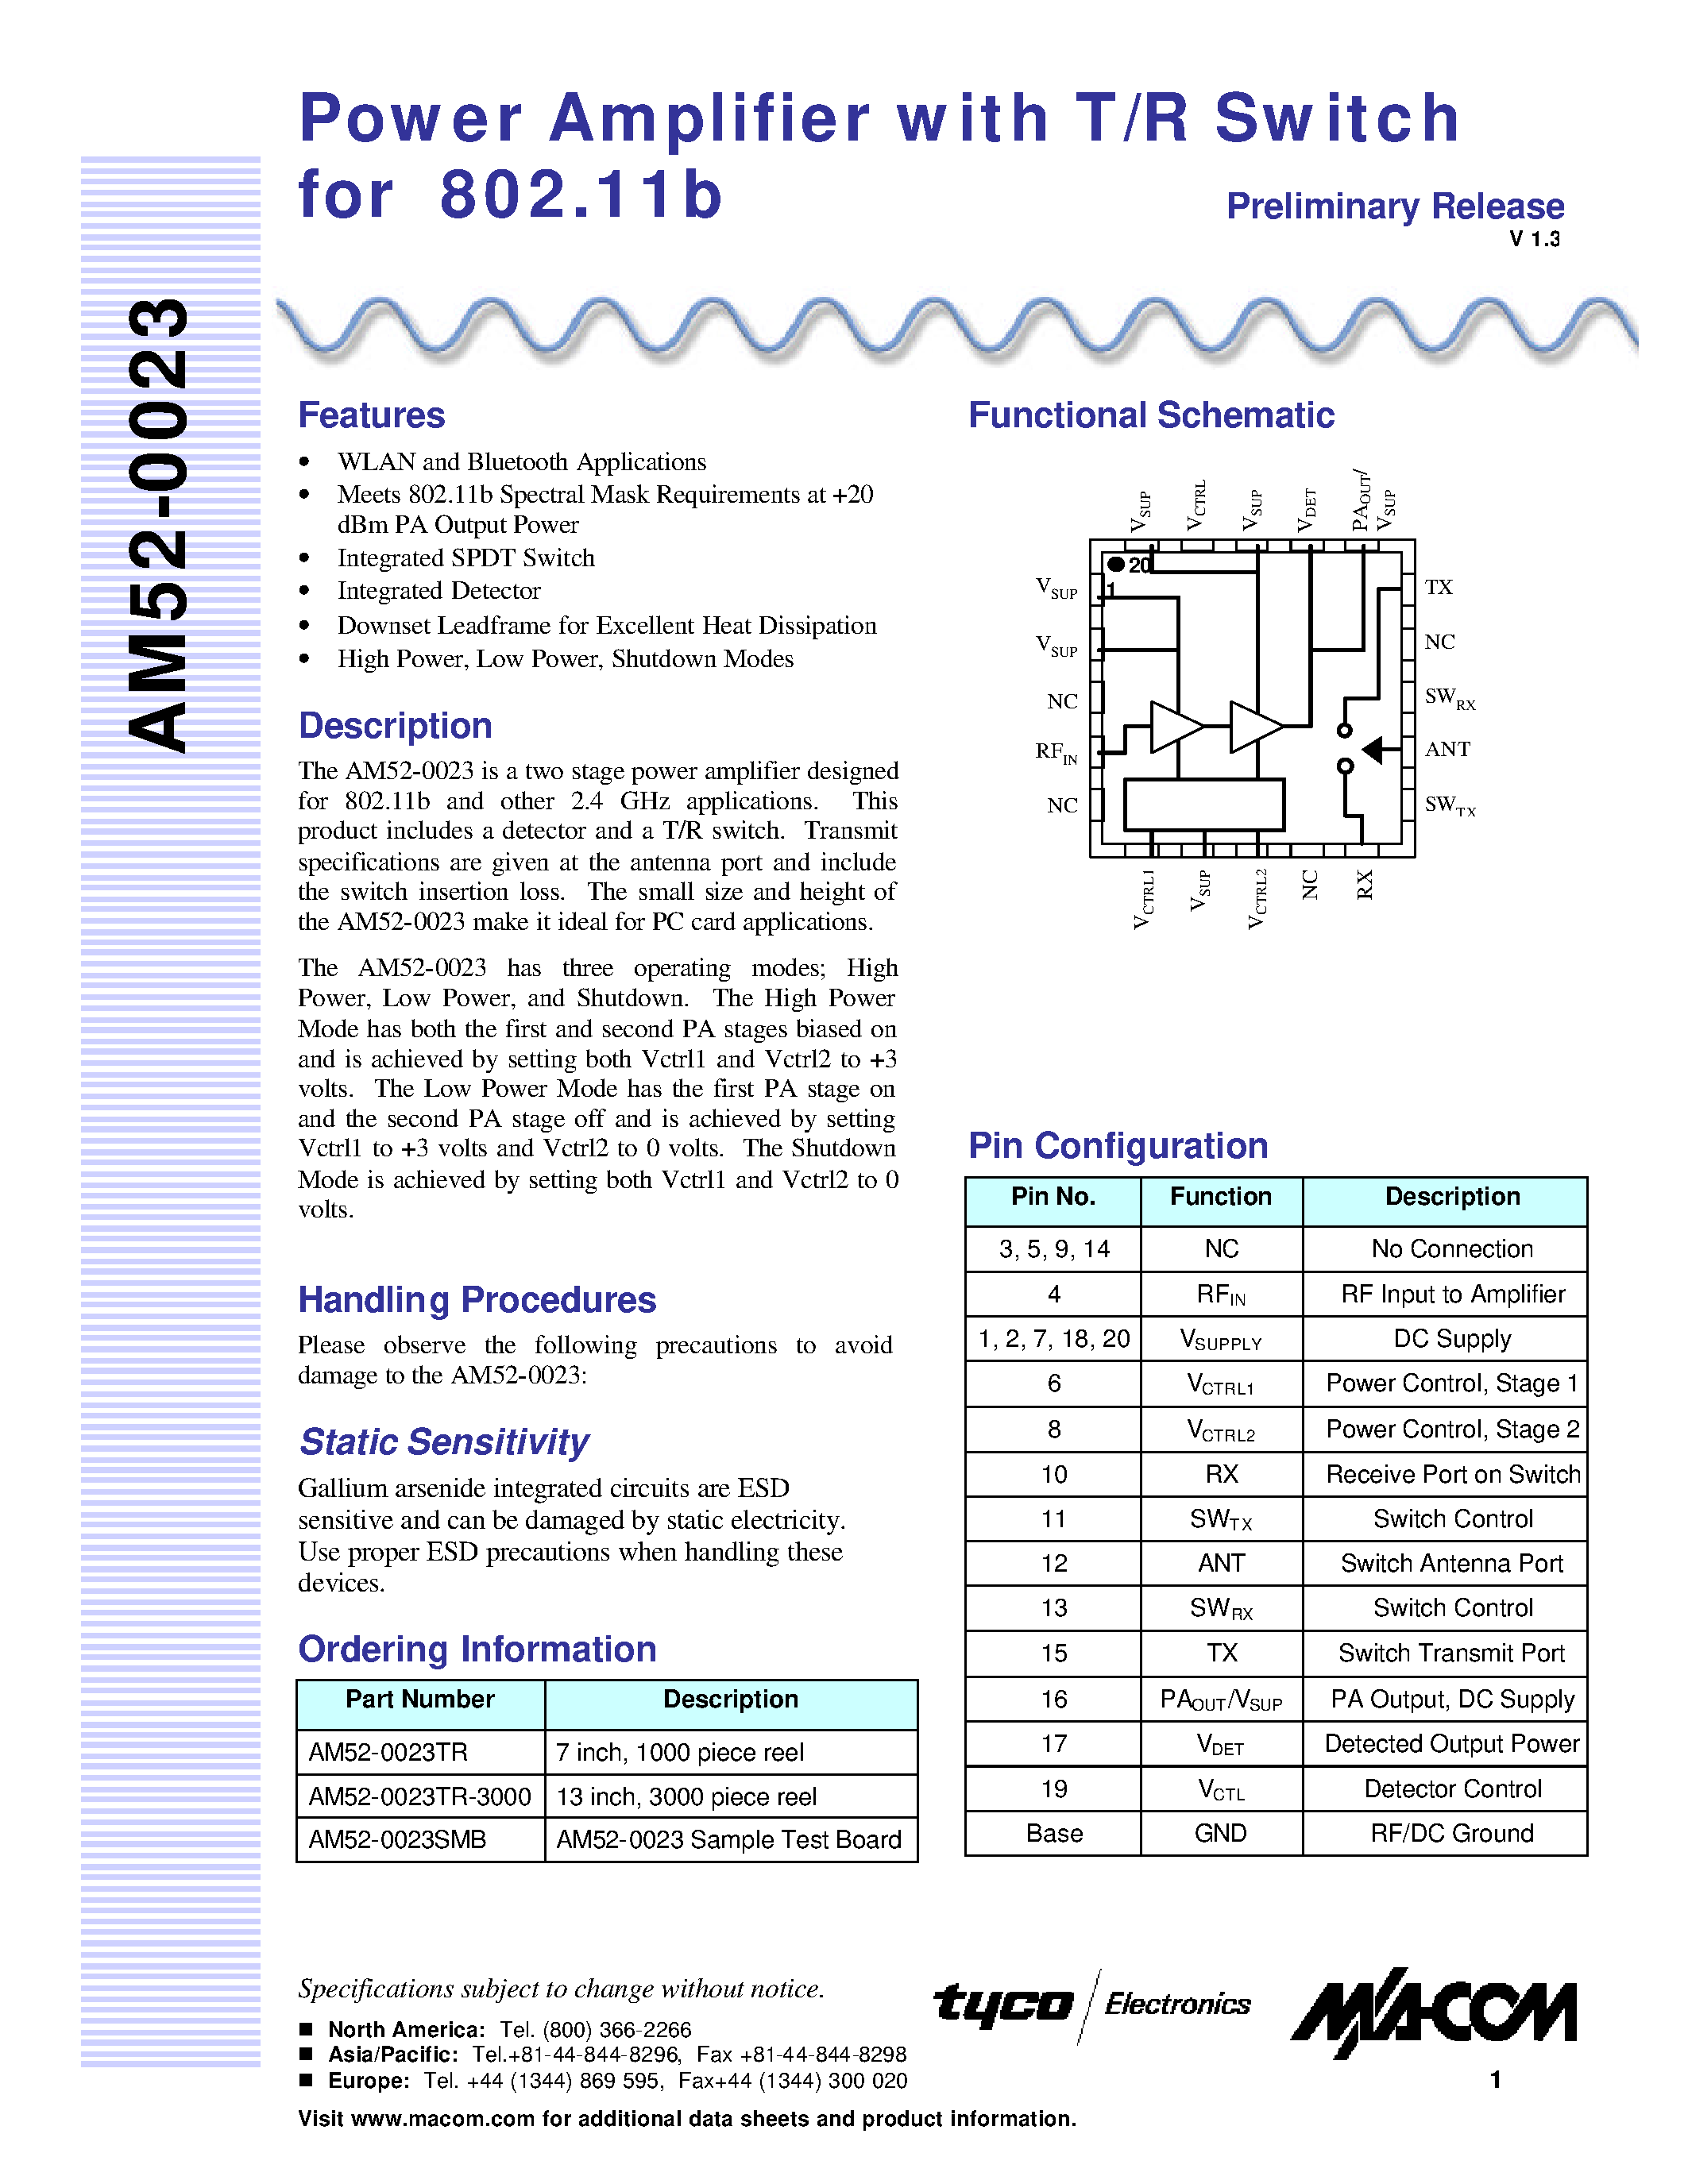 Datasheet AM52-0023 - Power Amplifier with T/R Switch for 802.11b page 1